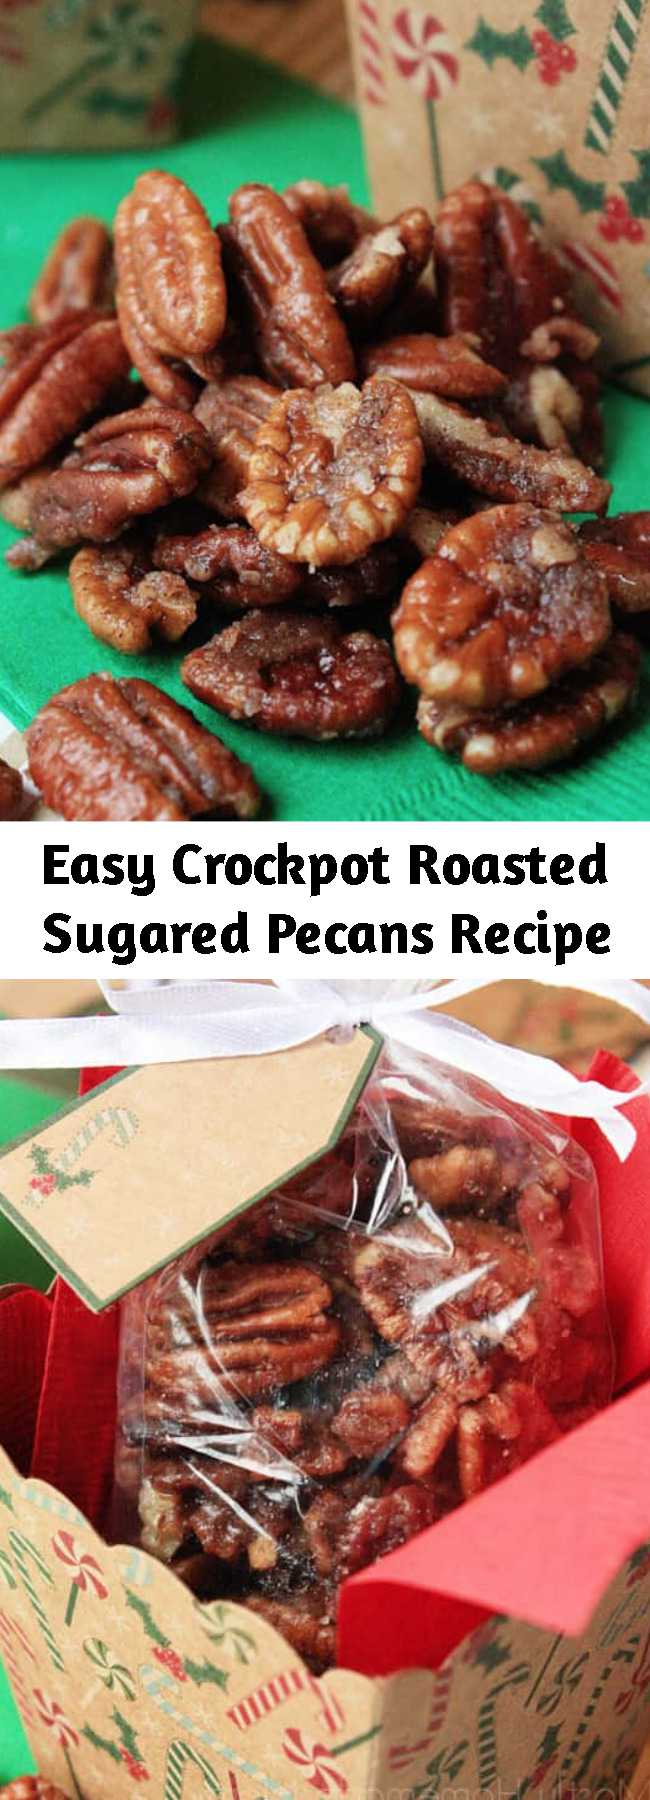 Easy Crockpot Roasted Sugared Pecans Recipe - Halved pecans tossed with butter, powdered sugar, and spices and slow cooked until glazed. These make wonderful Christmas gifts!